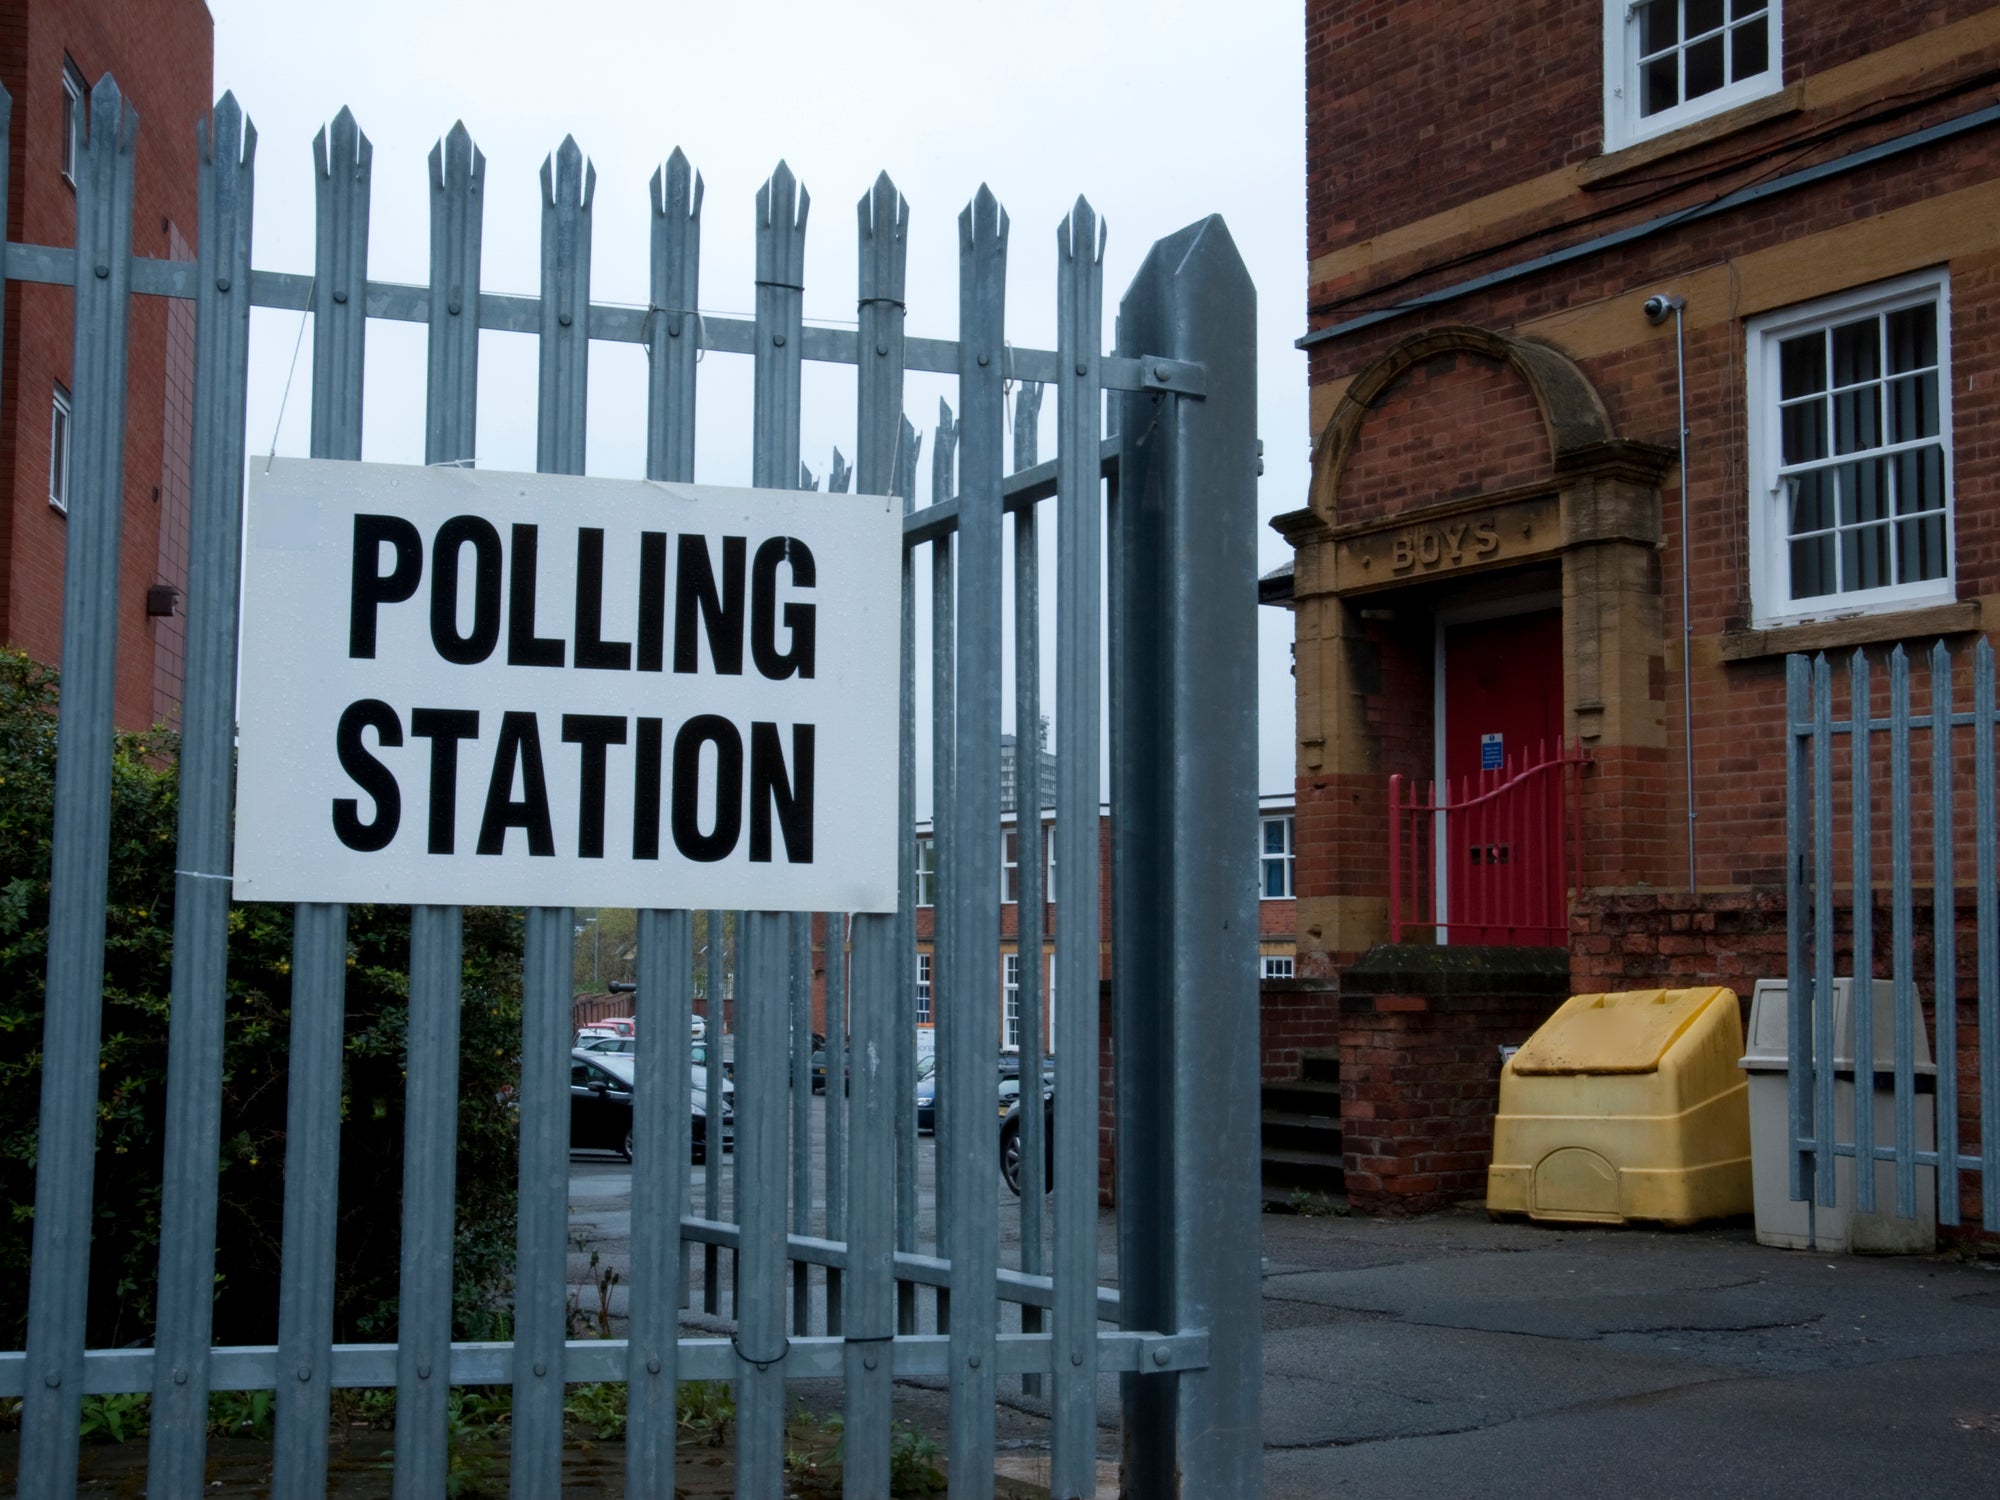 ‘Voters must be confident that their vote is theirs alone’